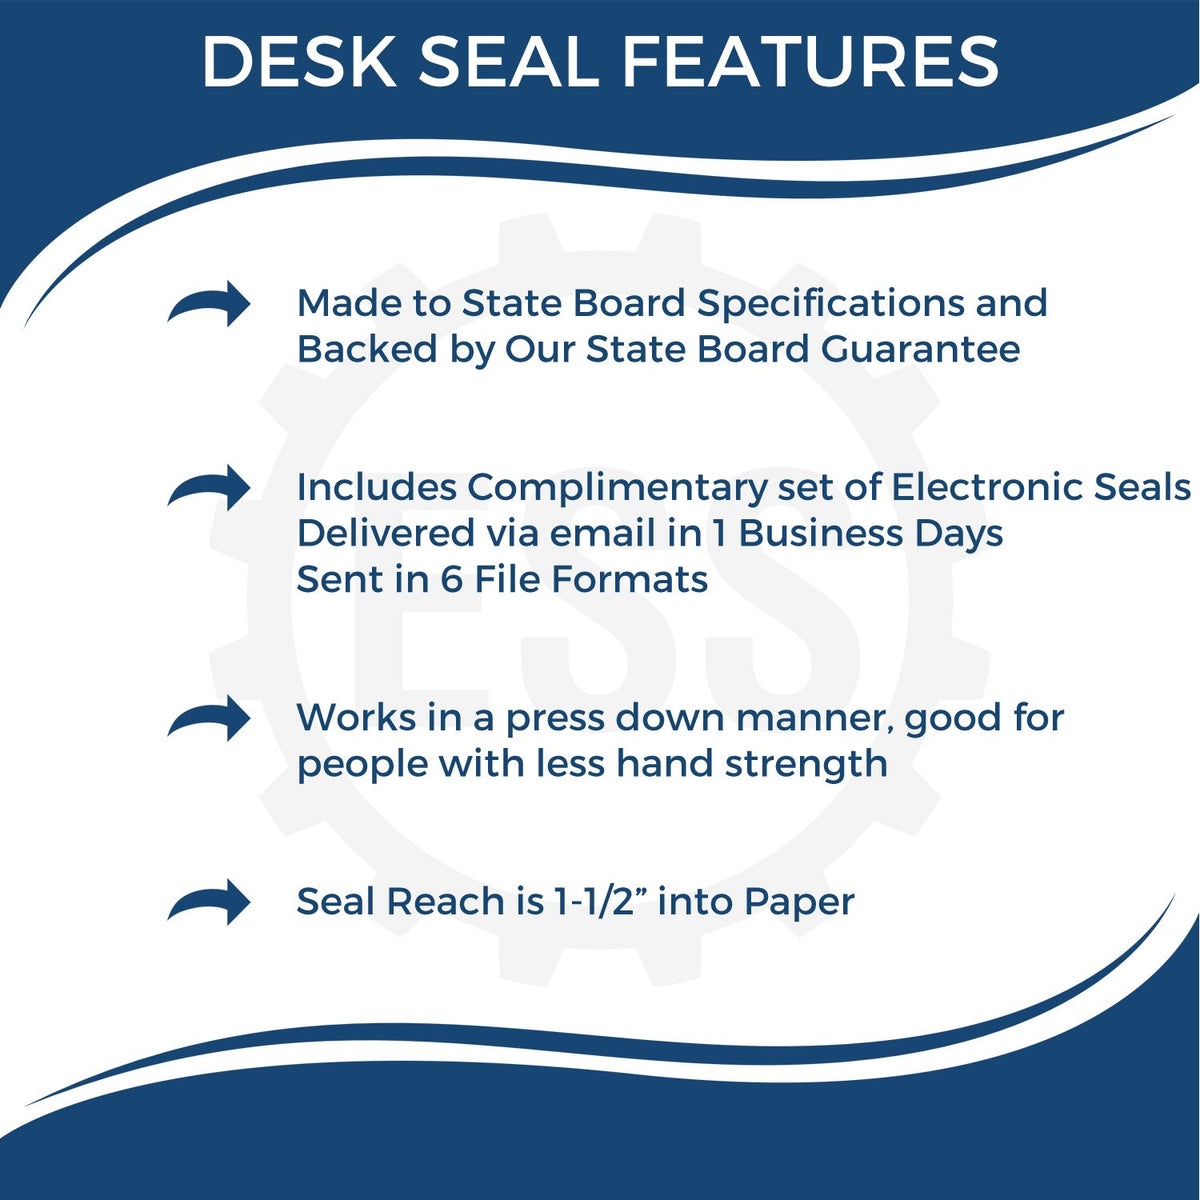 A picture of an infographic highlighting the selling points for the Louisiana Desk Surveyor Seal Embosser